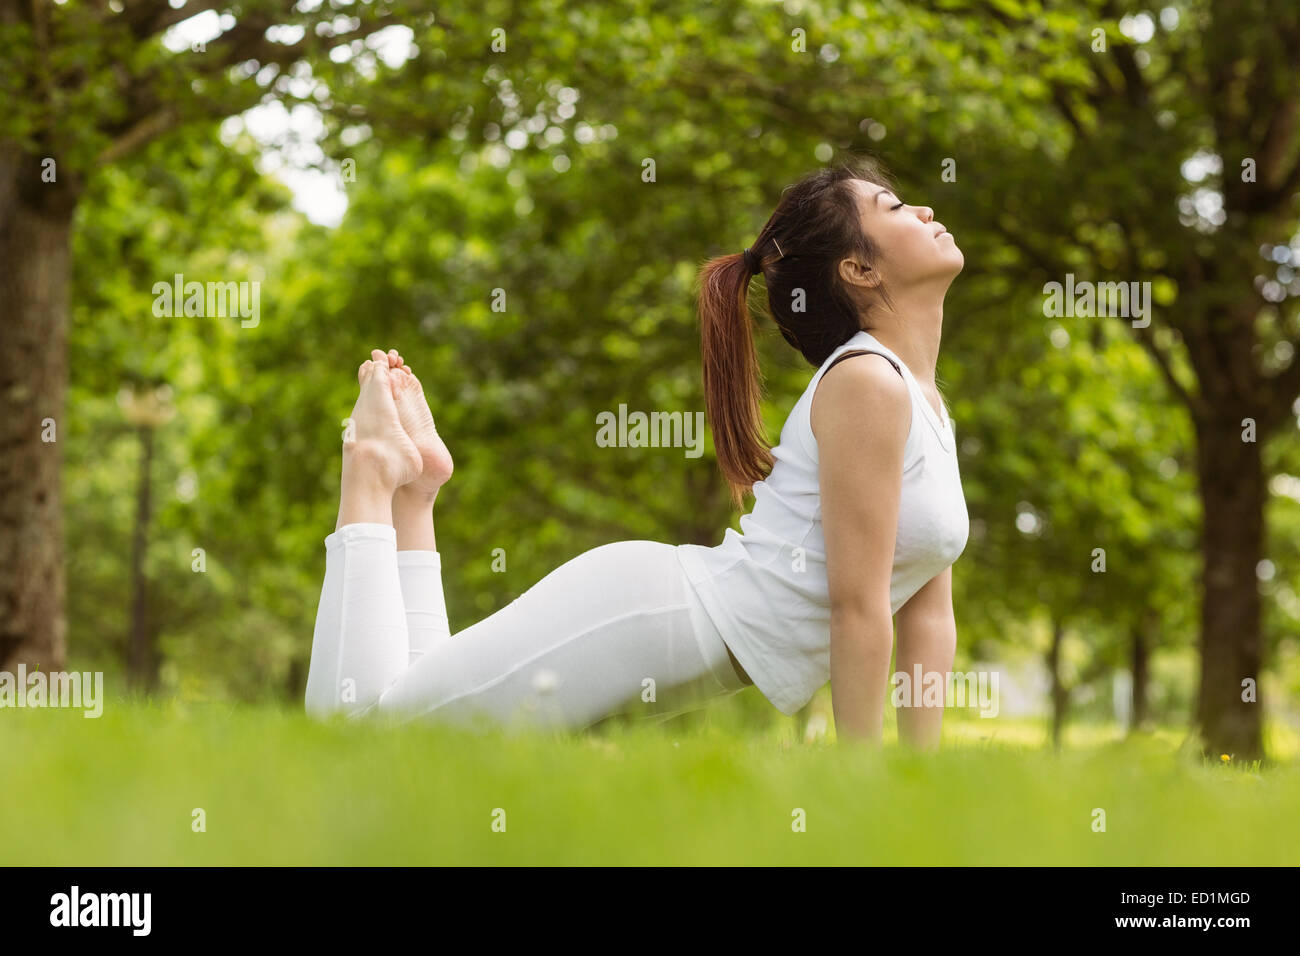 Healthy woman doing stretching exercises at park Stock Photo